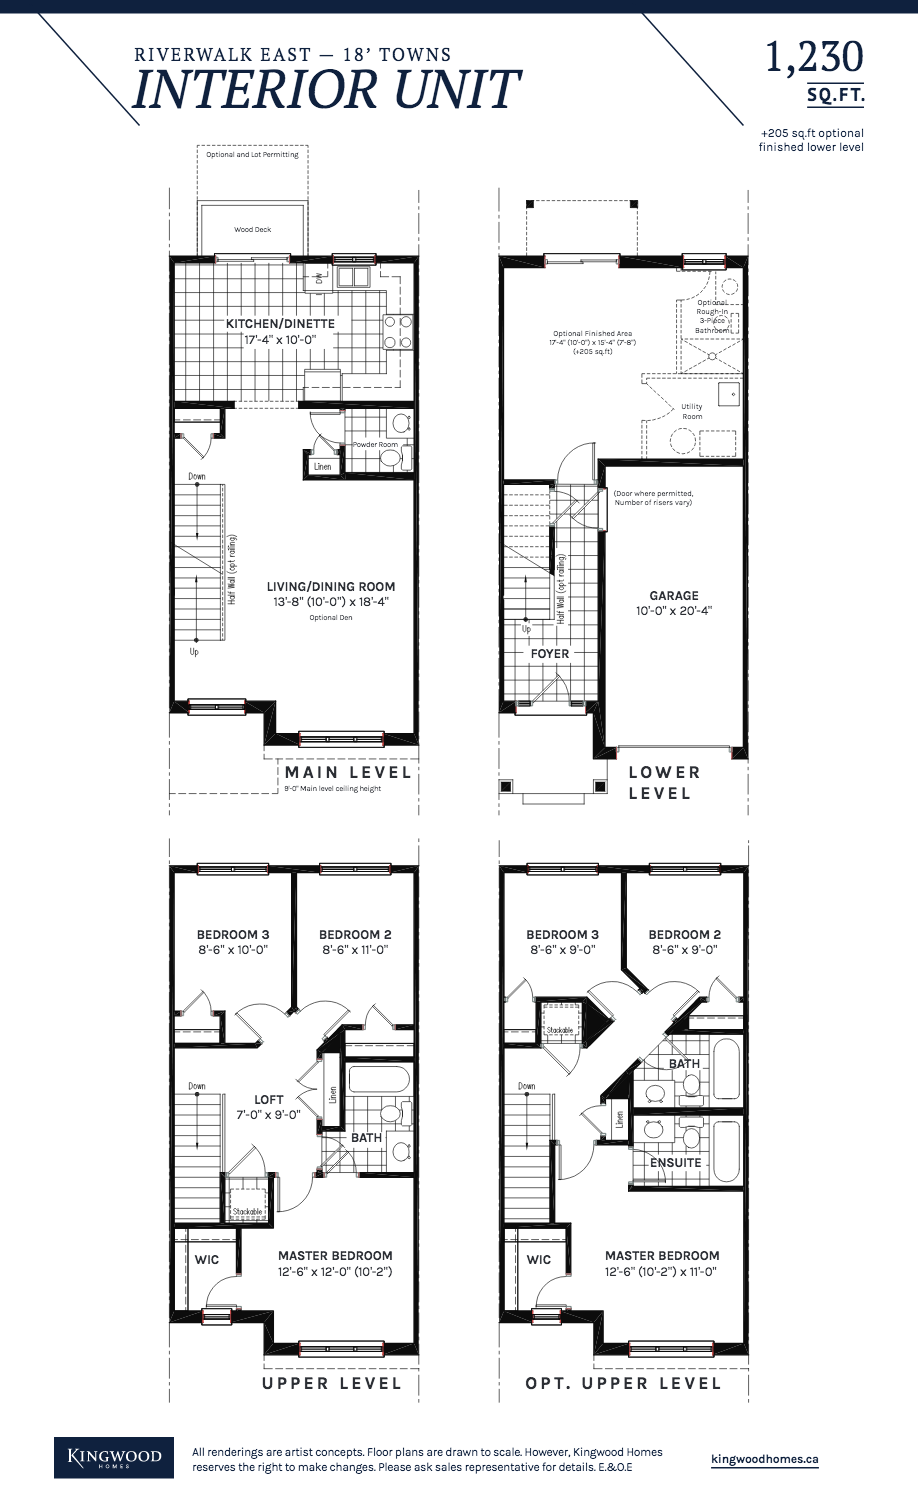  Interior Unit  Floor Plan of Riverwalk East Towns with undefined beds